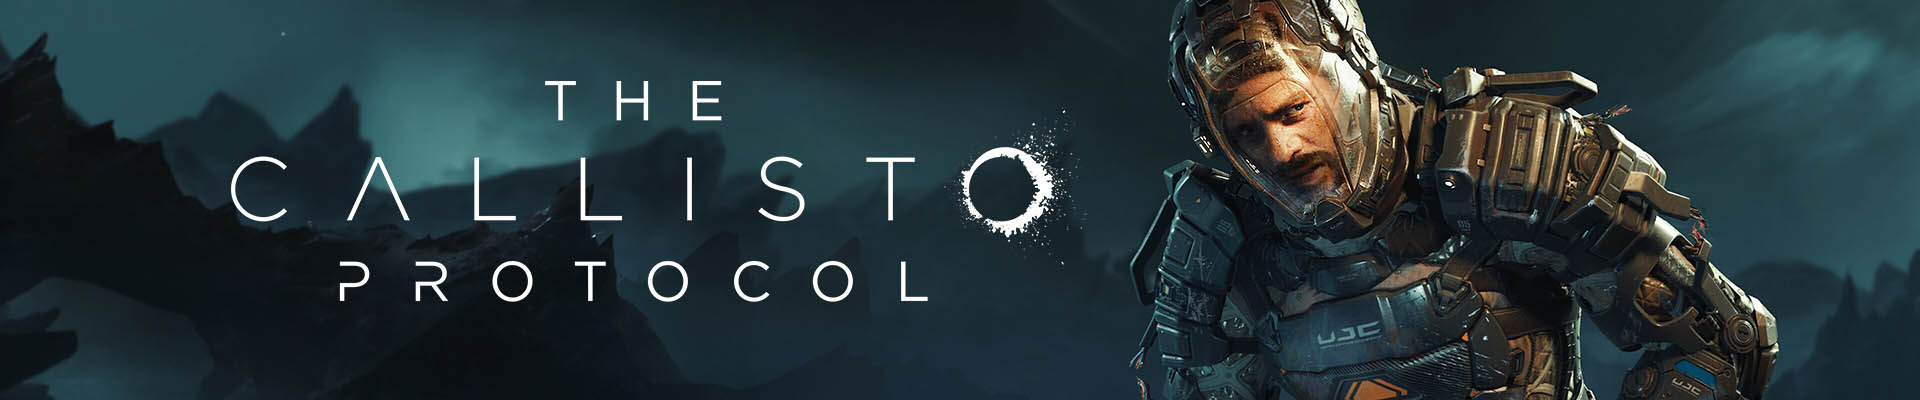 The Callisto Protocol trophy list finished, prepare for dismemberment